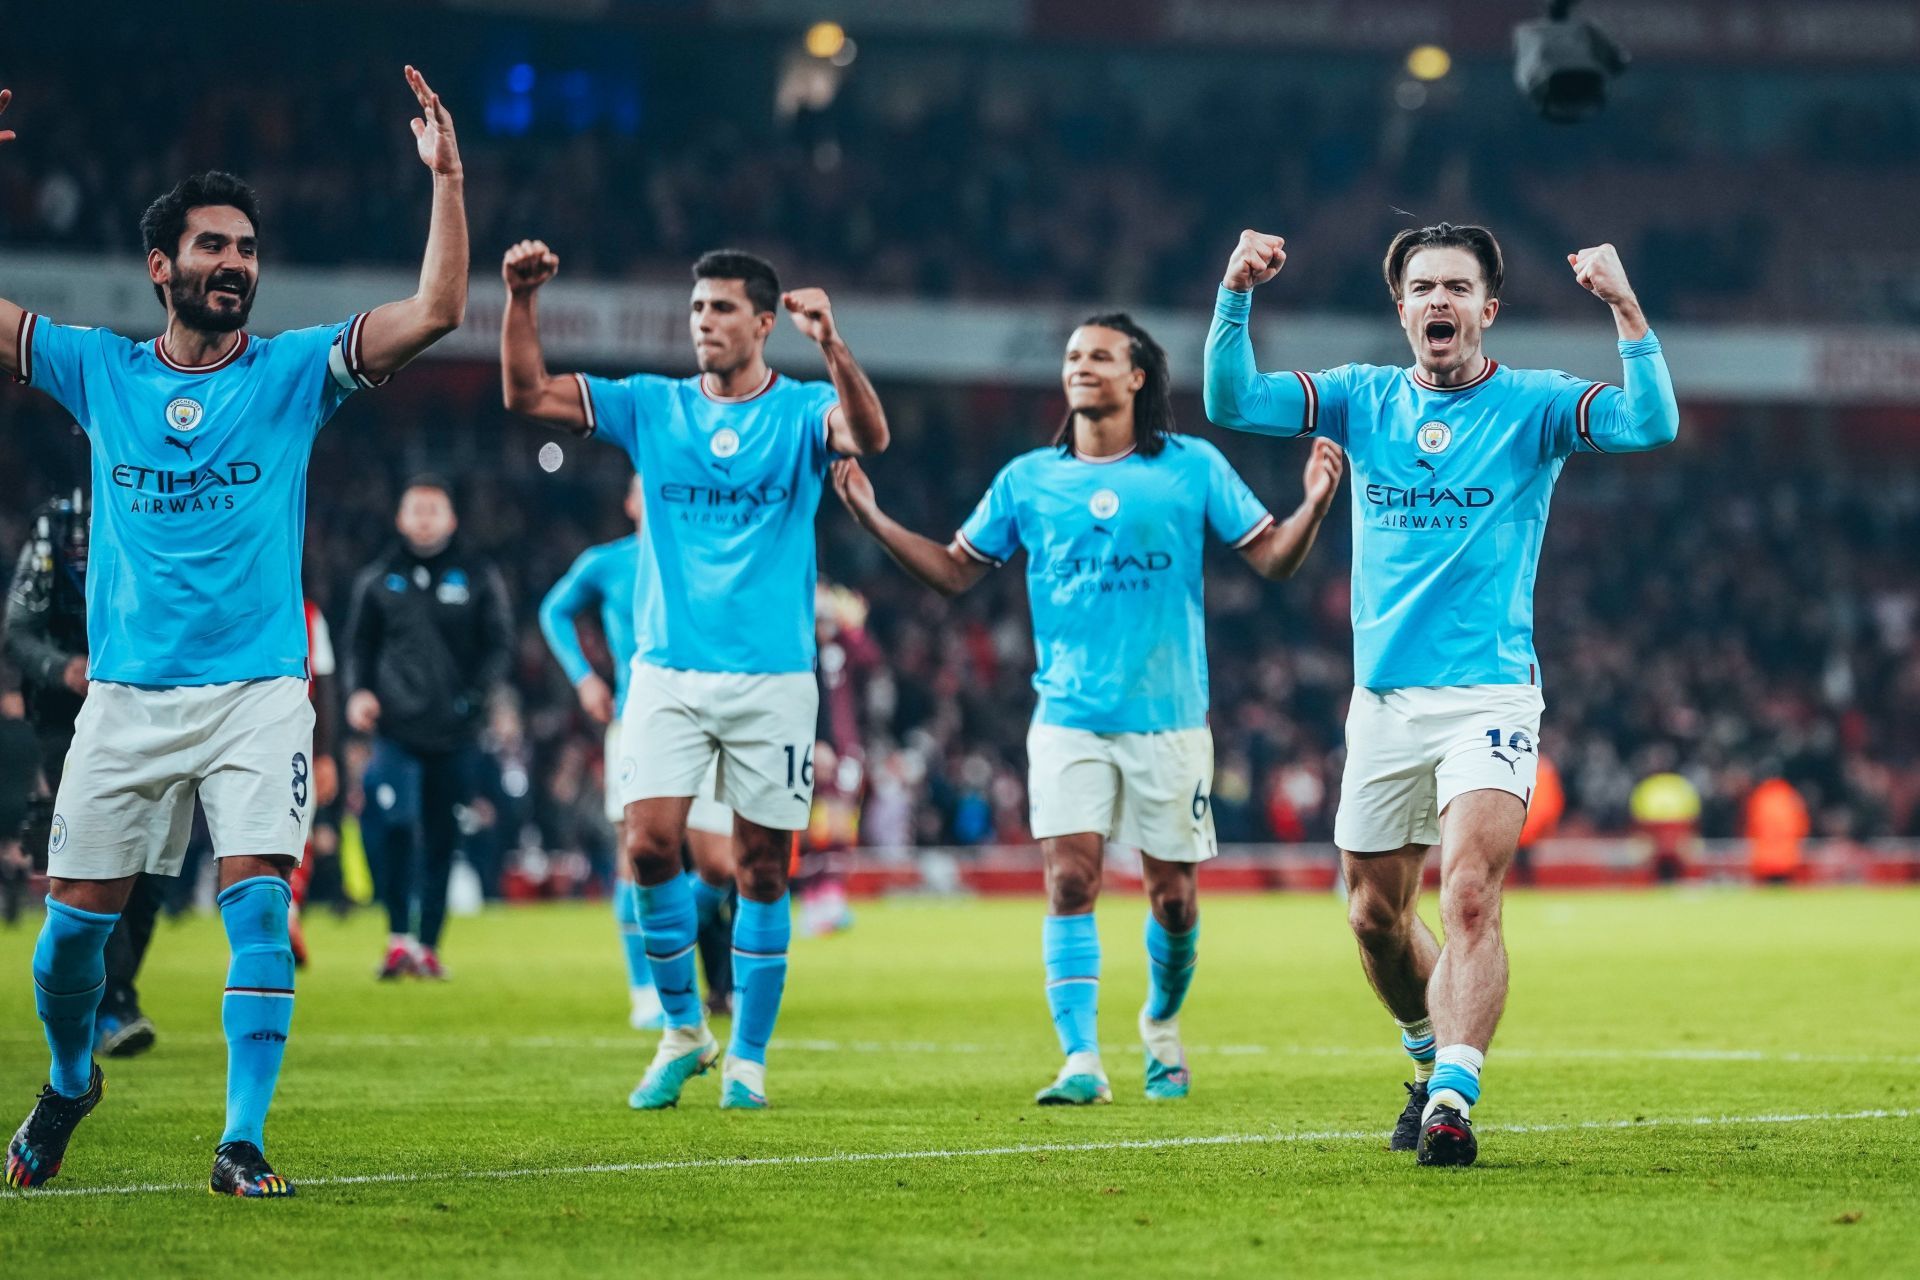 Manchester City got the better of Arsenal in the Premier League